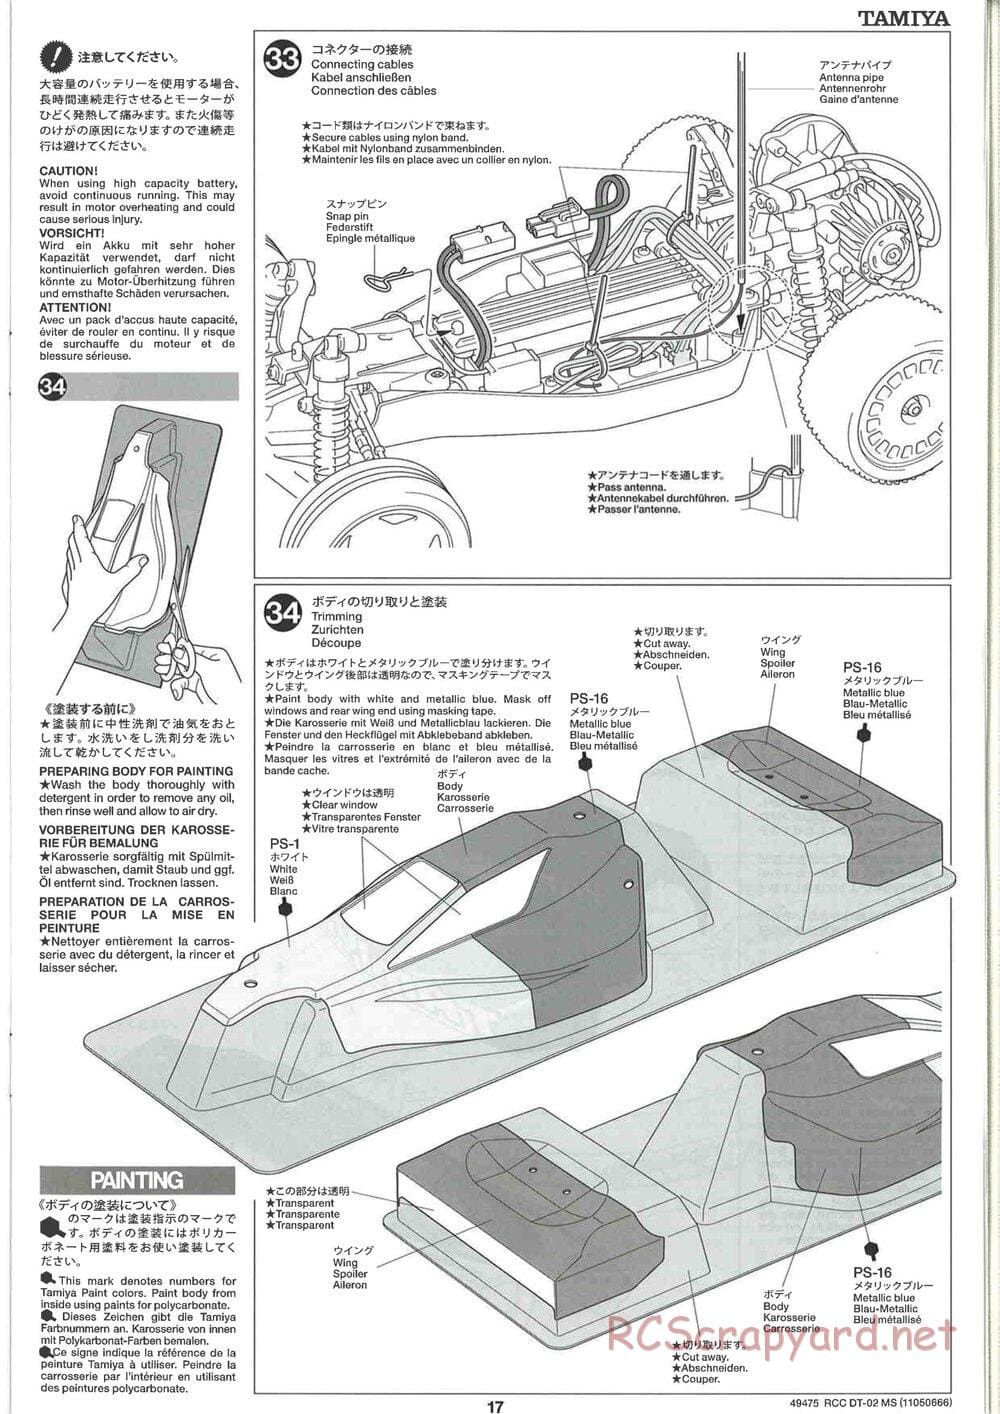 Tamiya - DT-02 MS Chassis - Manual - Page 18